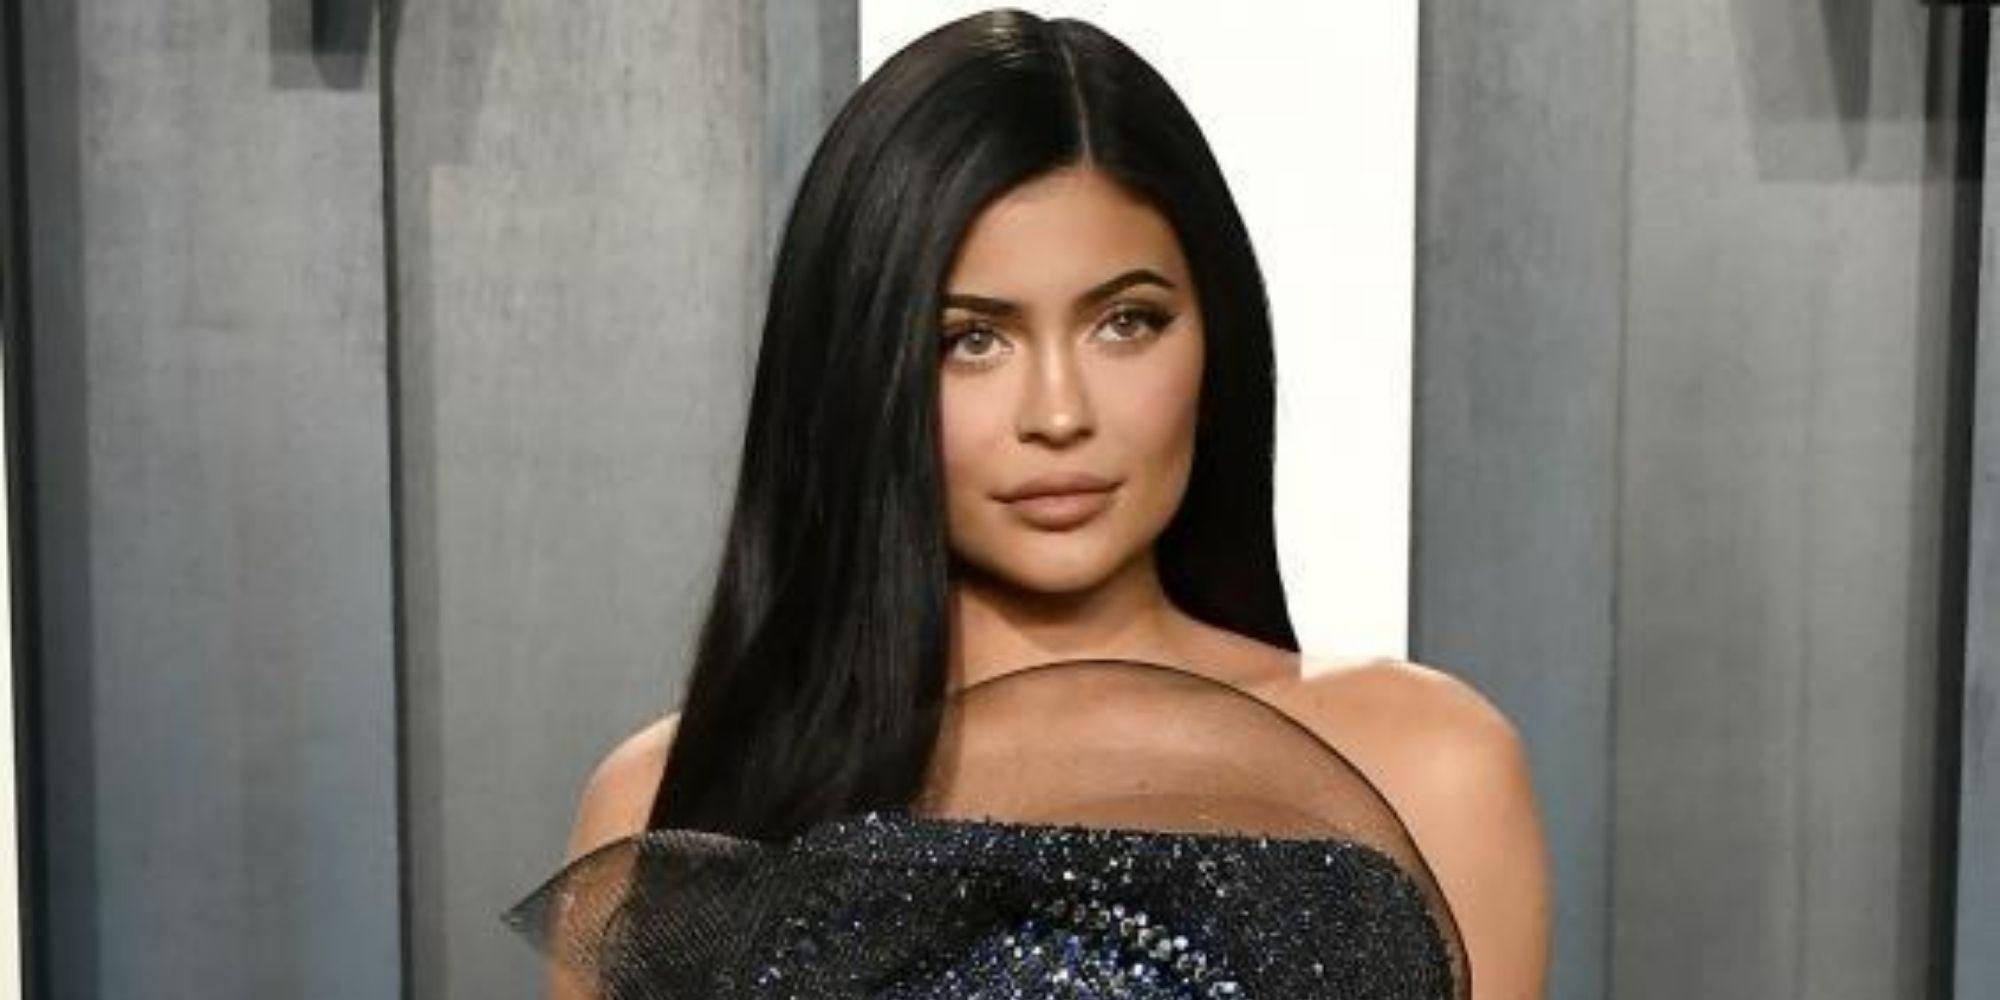 Kylie Jenner branded 'ridiculous' for importing '$200,000 pony' during pandemic - indy100